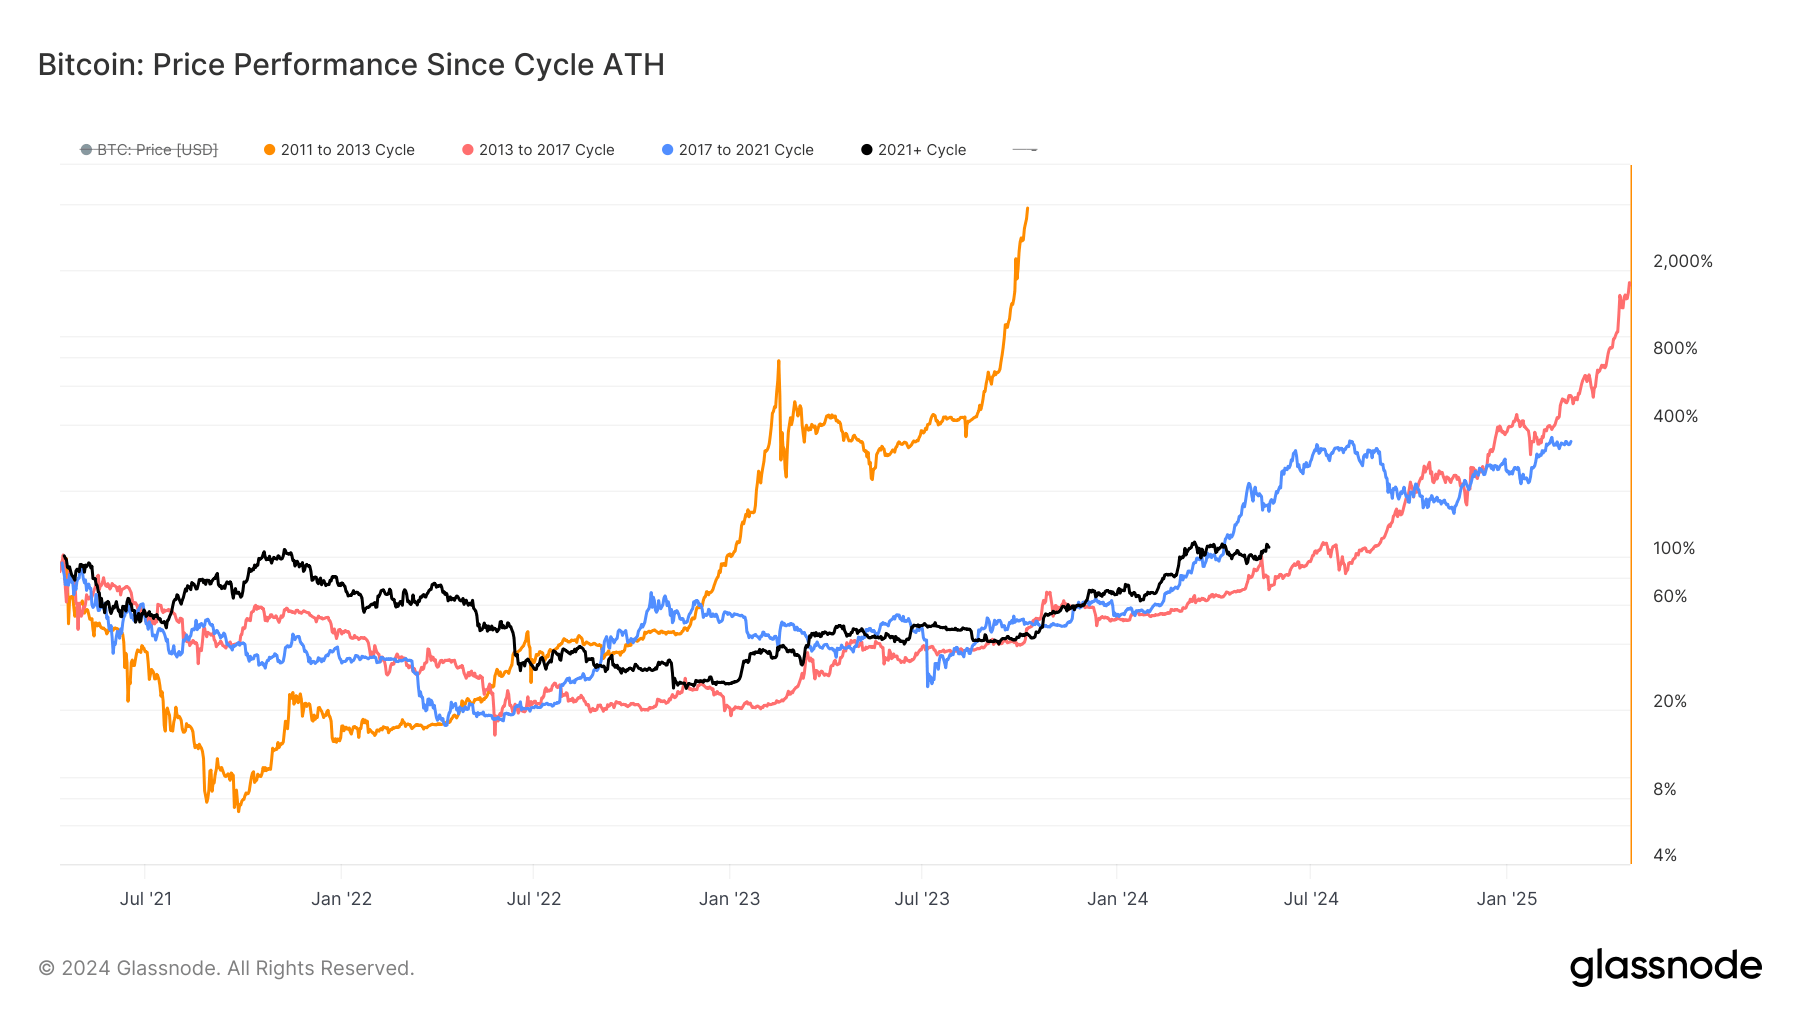 Bitcoin Price Performance since cycle ATH: (Source: Glassnode)